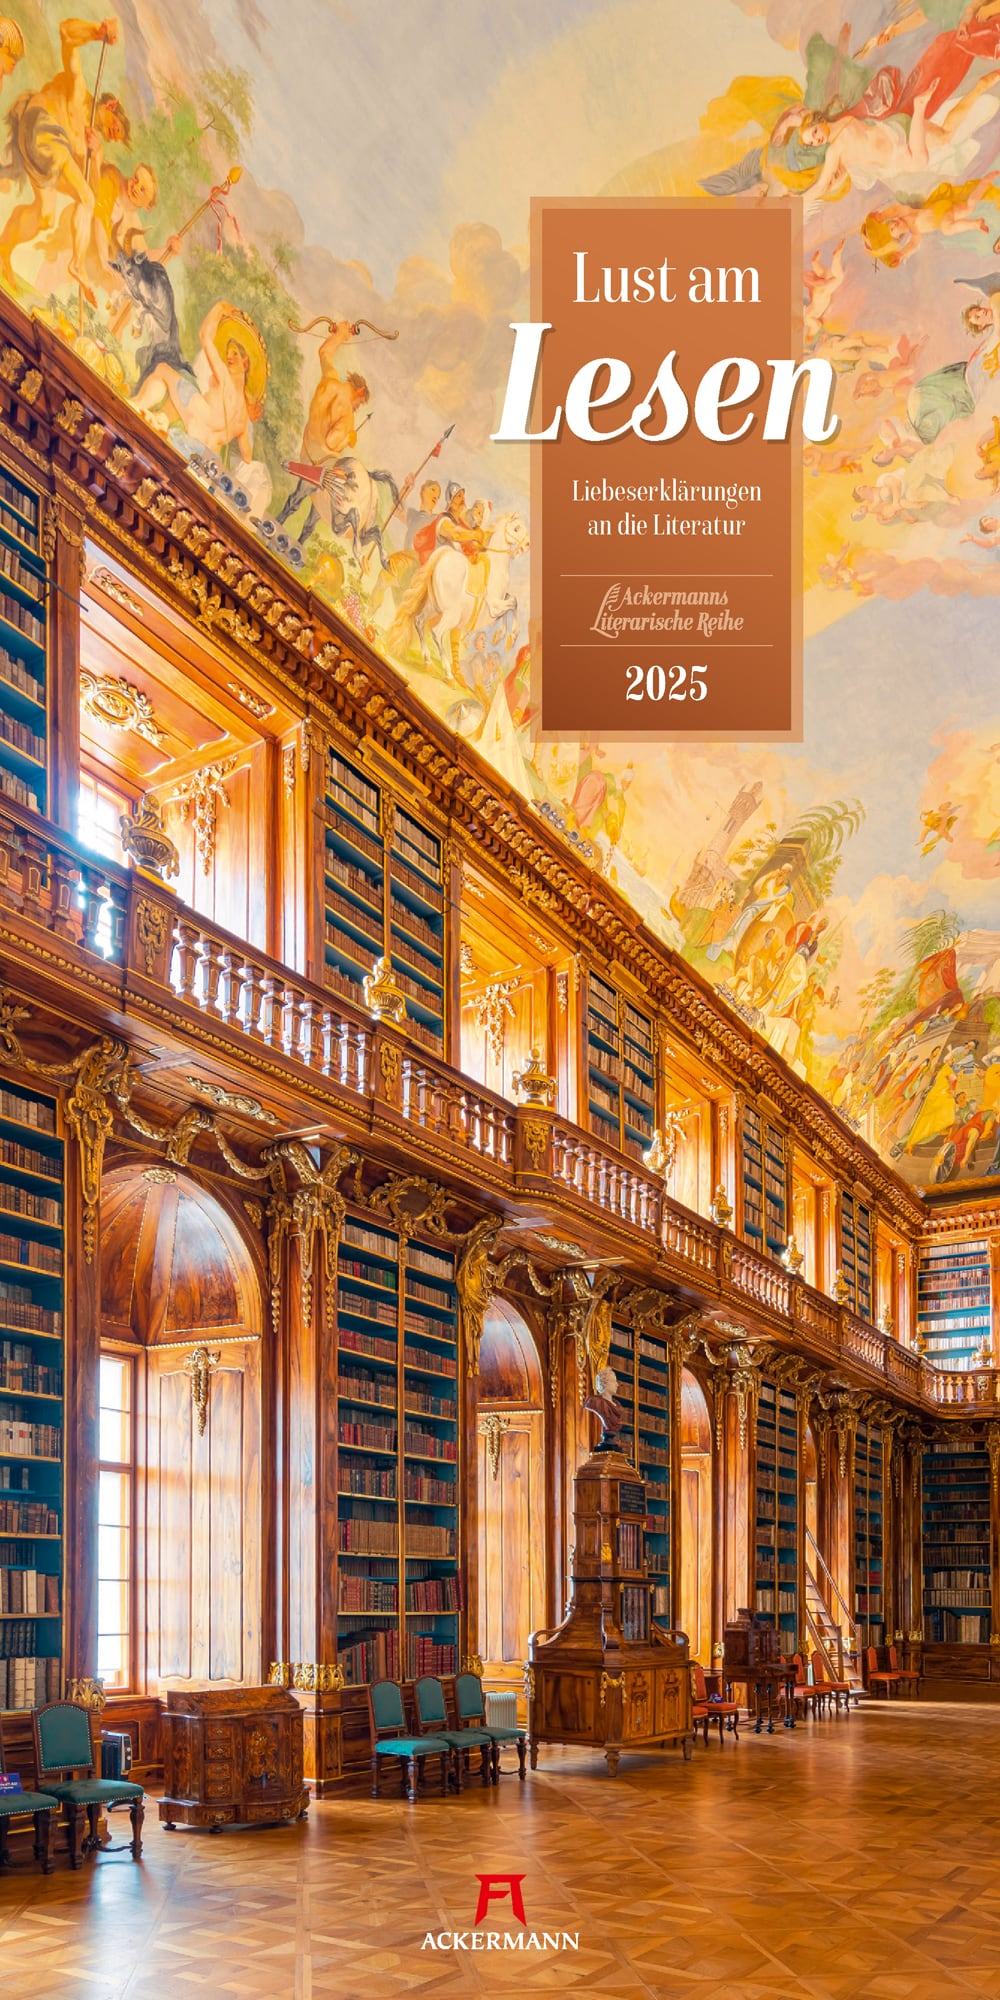 Ackermann Calendar The Joy of Reading 2025 - Cover Page